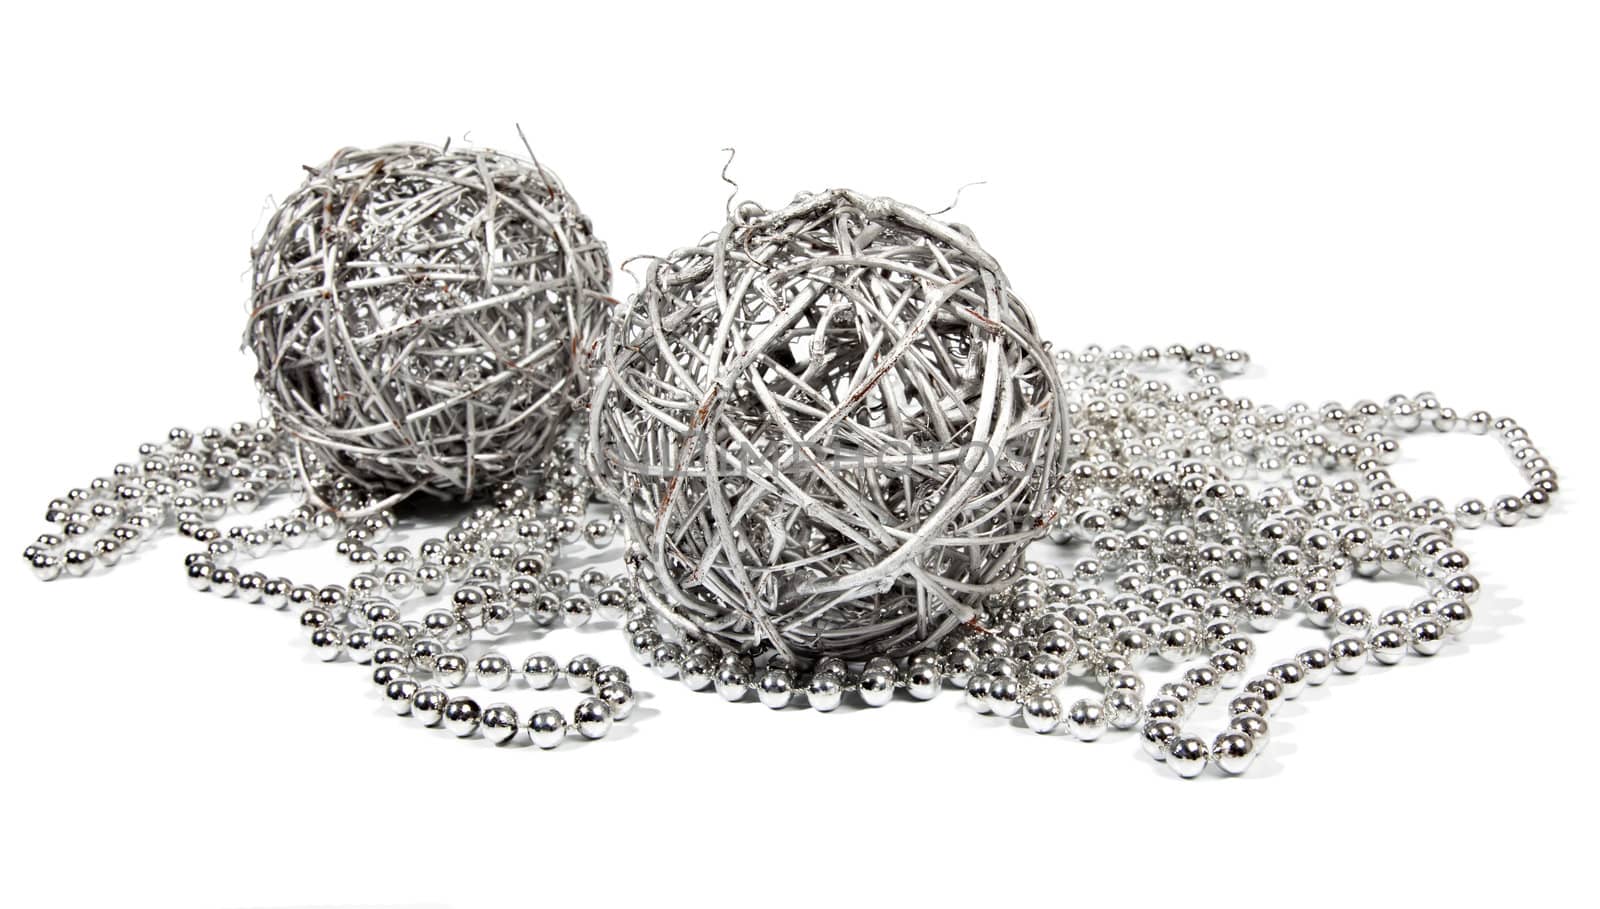 Two wicker balls and silver beads by RawGroup